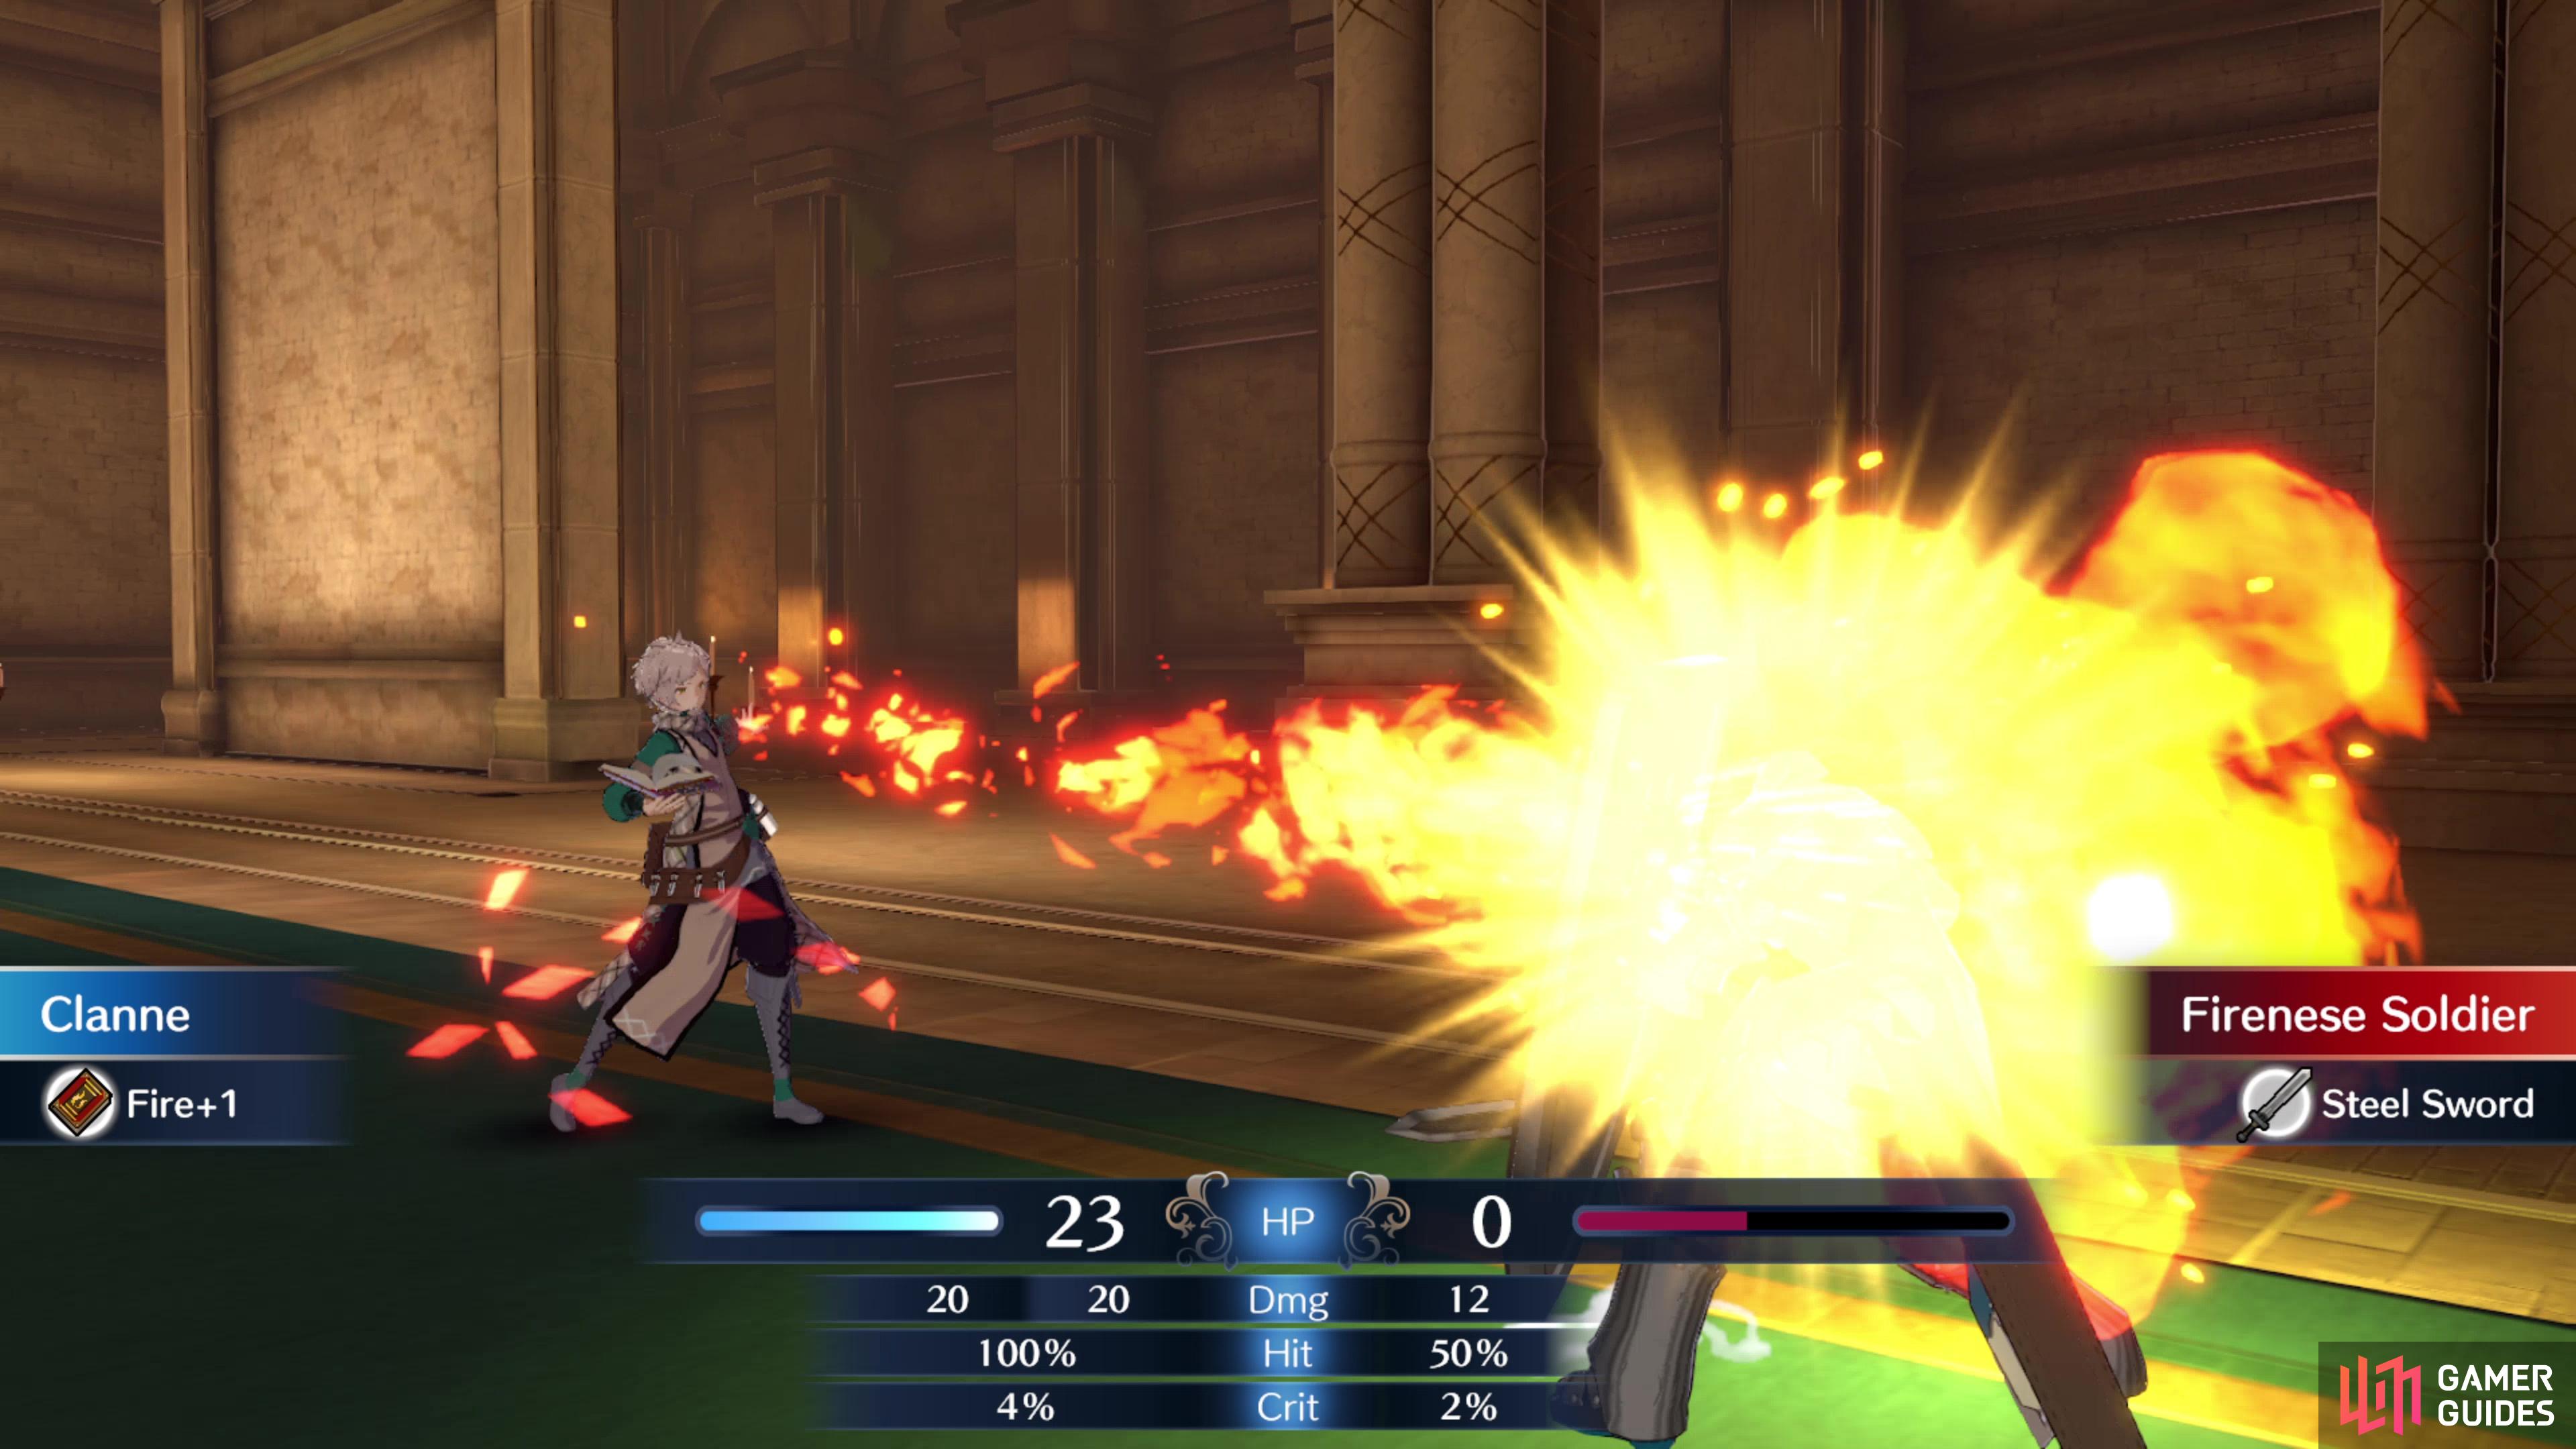 Clanne casting Fire in !Fire Emblem Engage